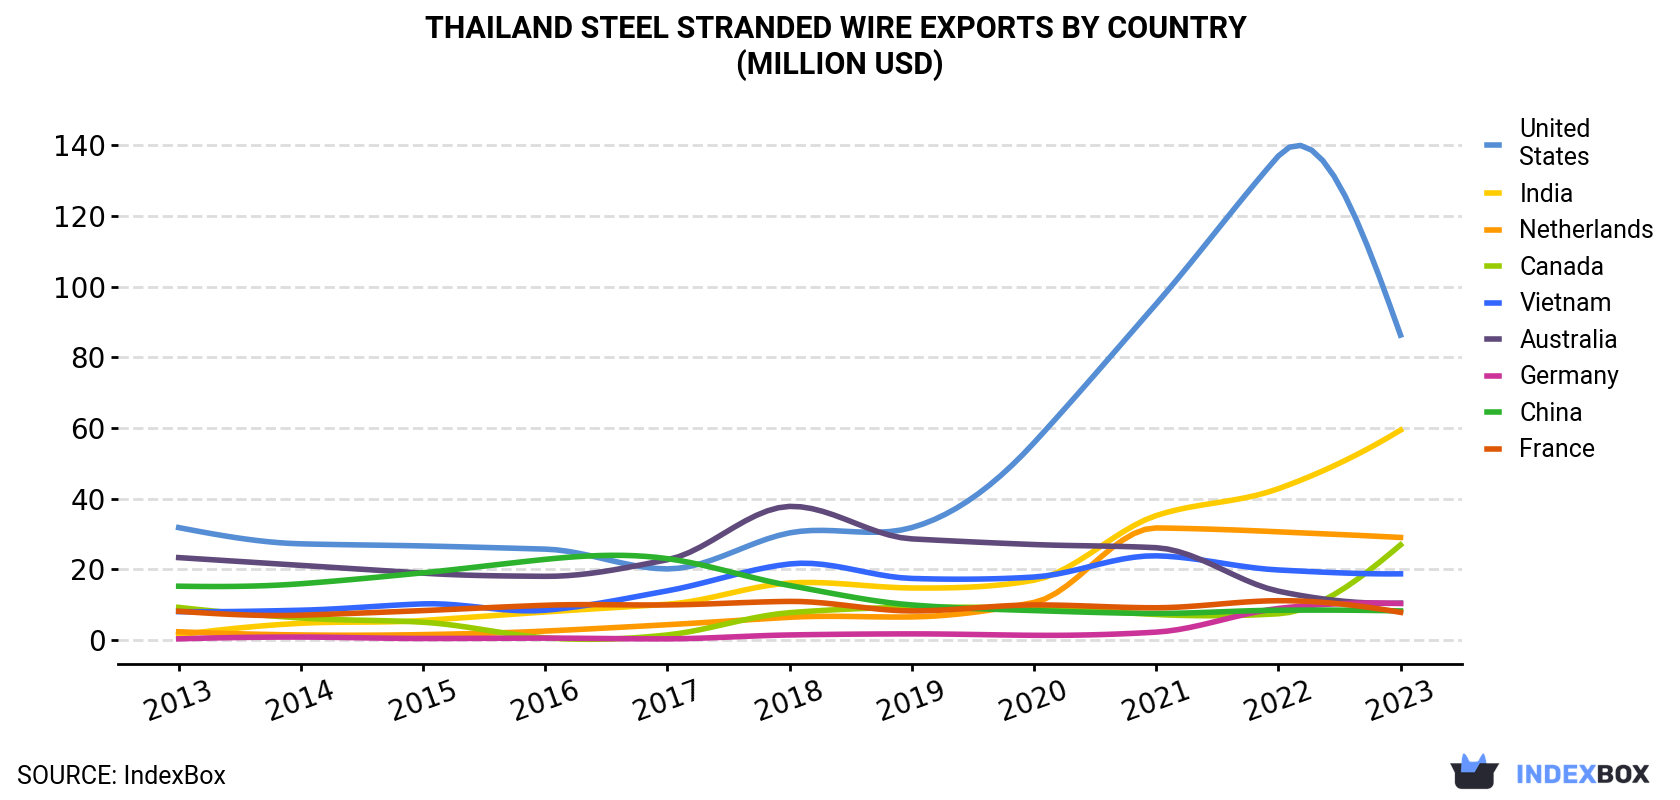 Thailand Steel Stranded Wire Exports By Country (Million USD)